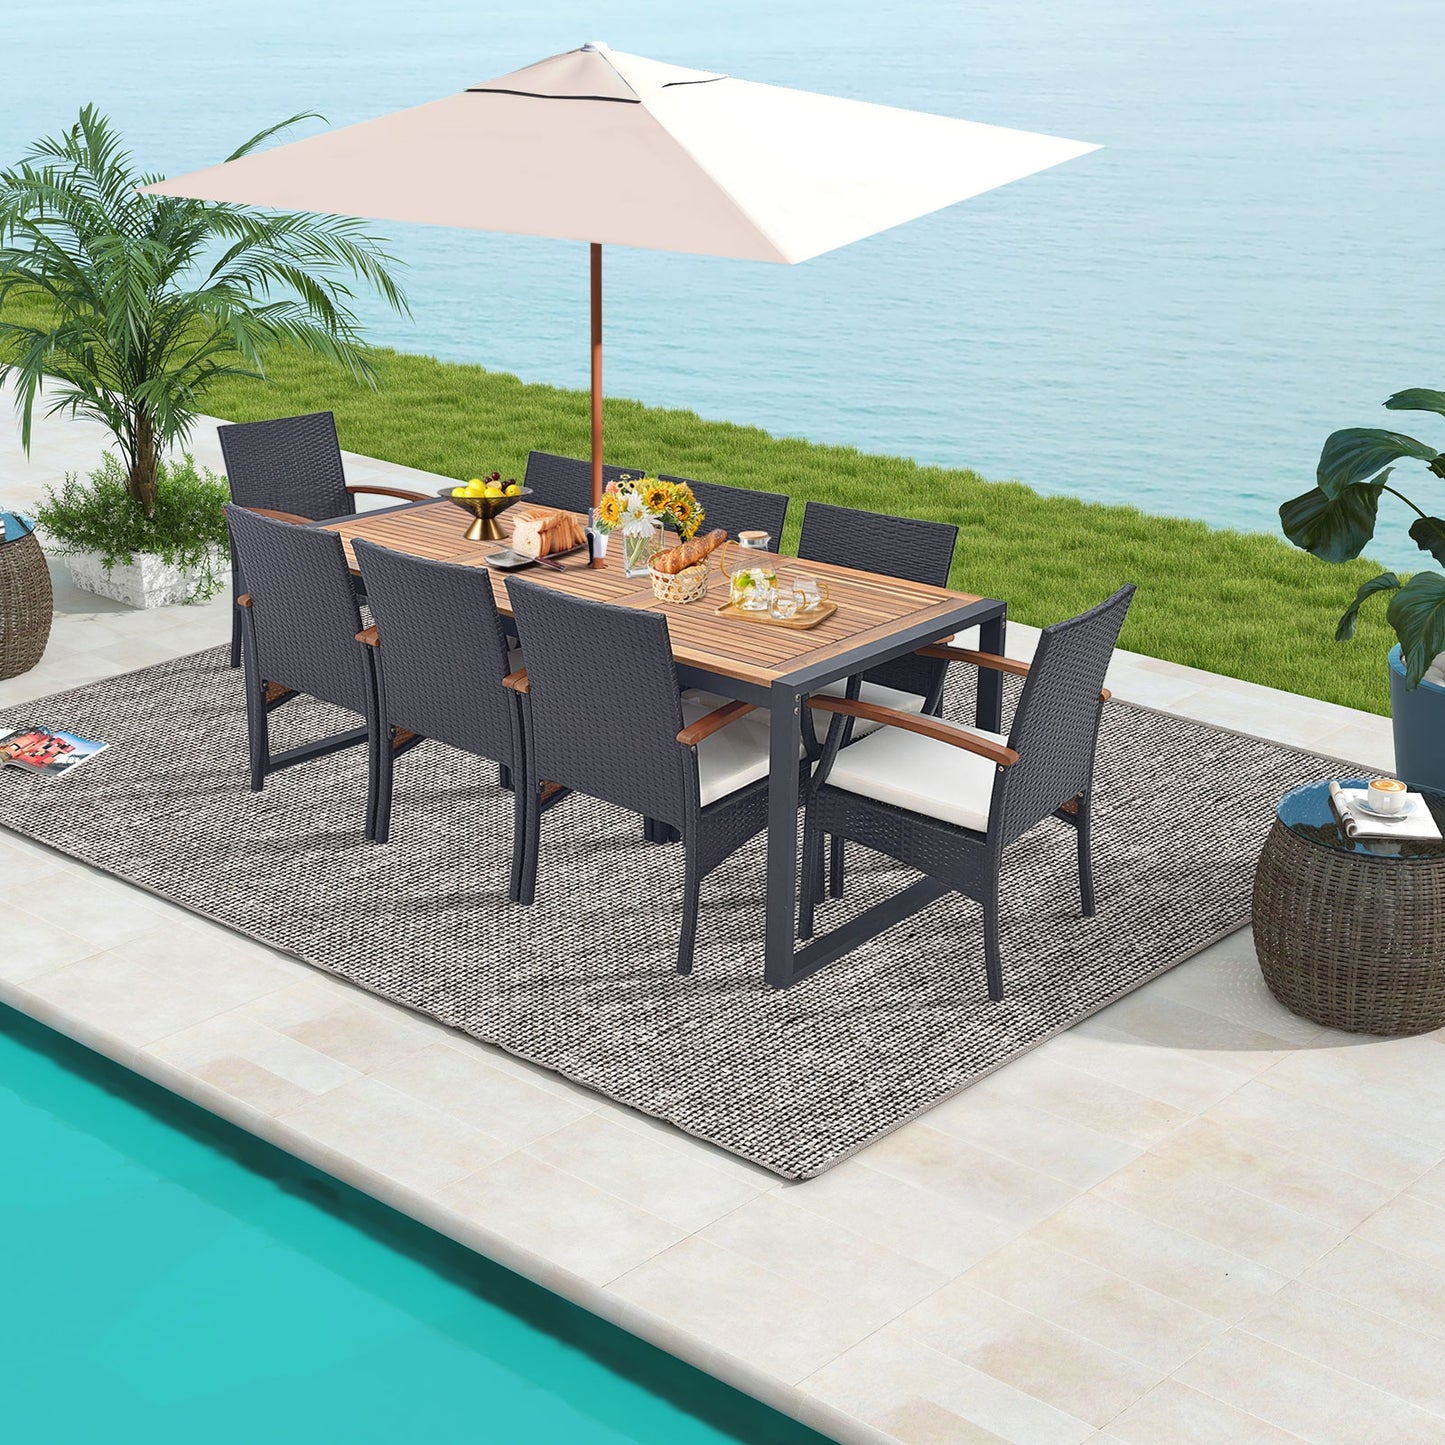 9 Pieces  Patio Rattan Dining Set with Acacia Wood Table for Backyard, Garden - Gallery Canada